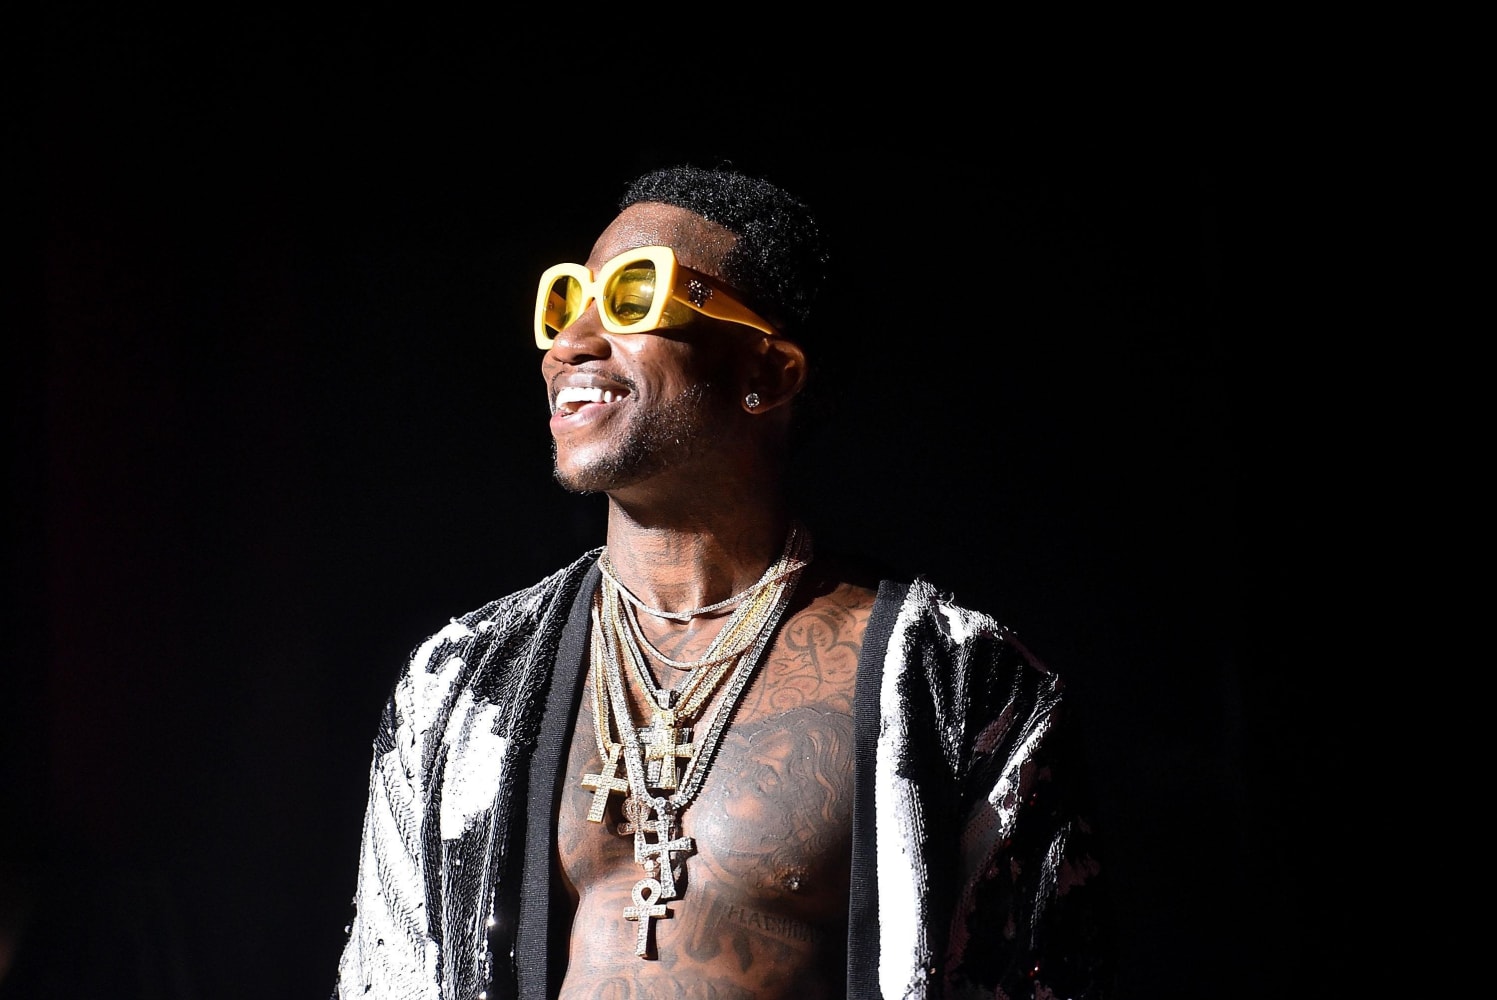 Gucci Mane: Clothes, Outfits, Brands, Style and Looks